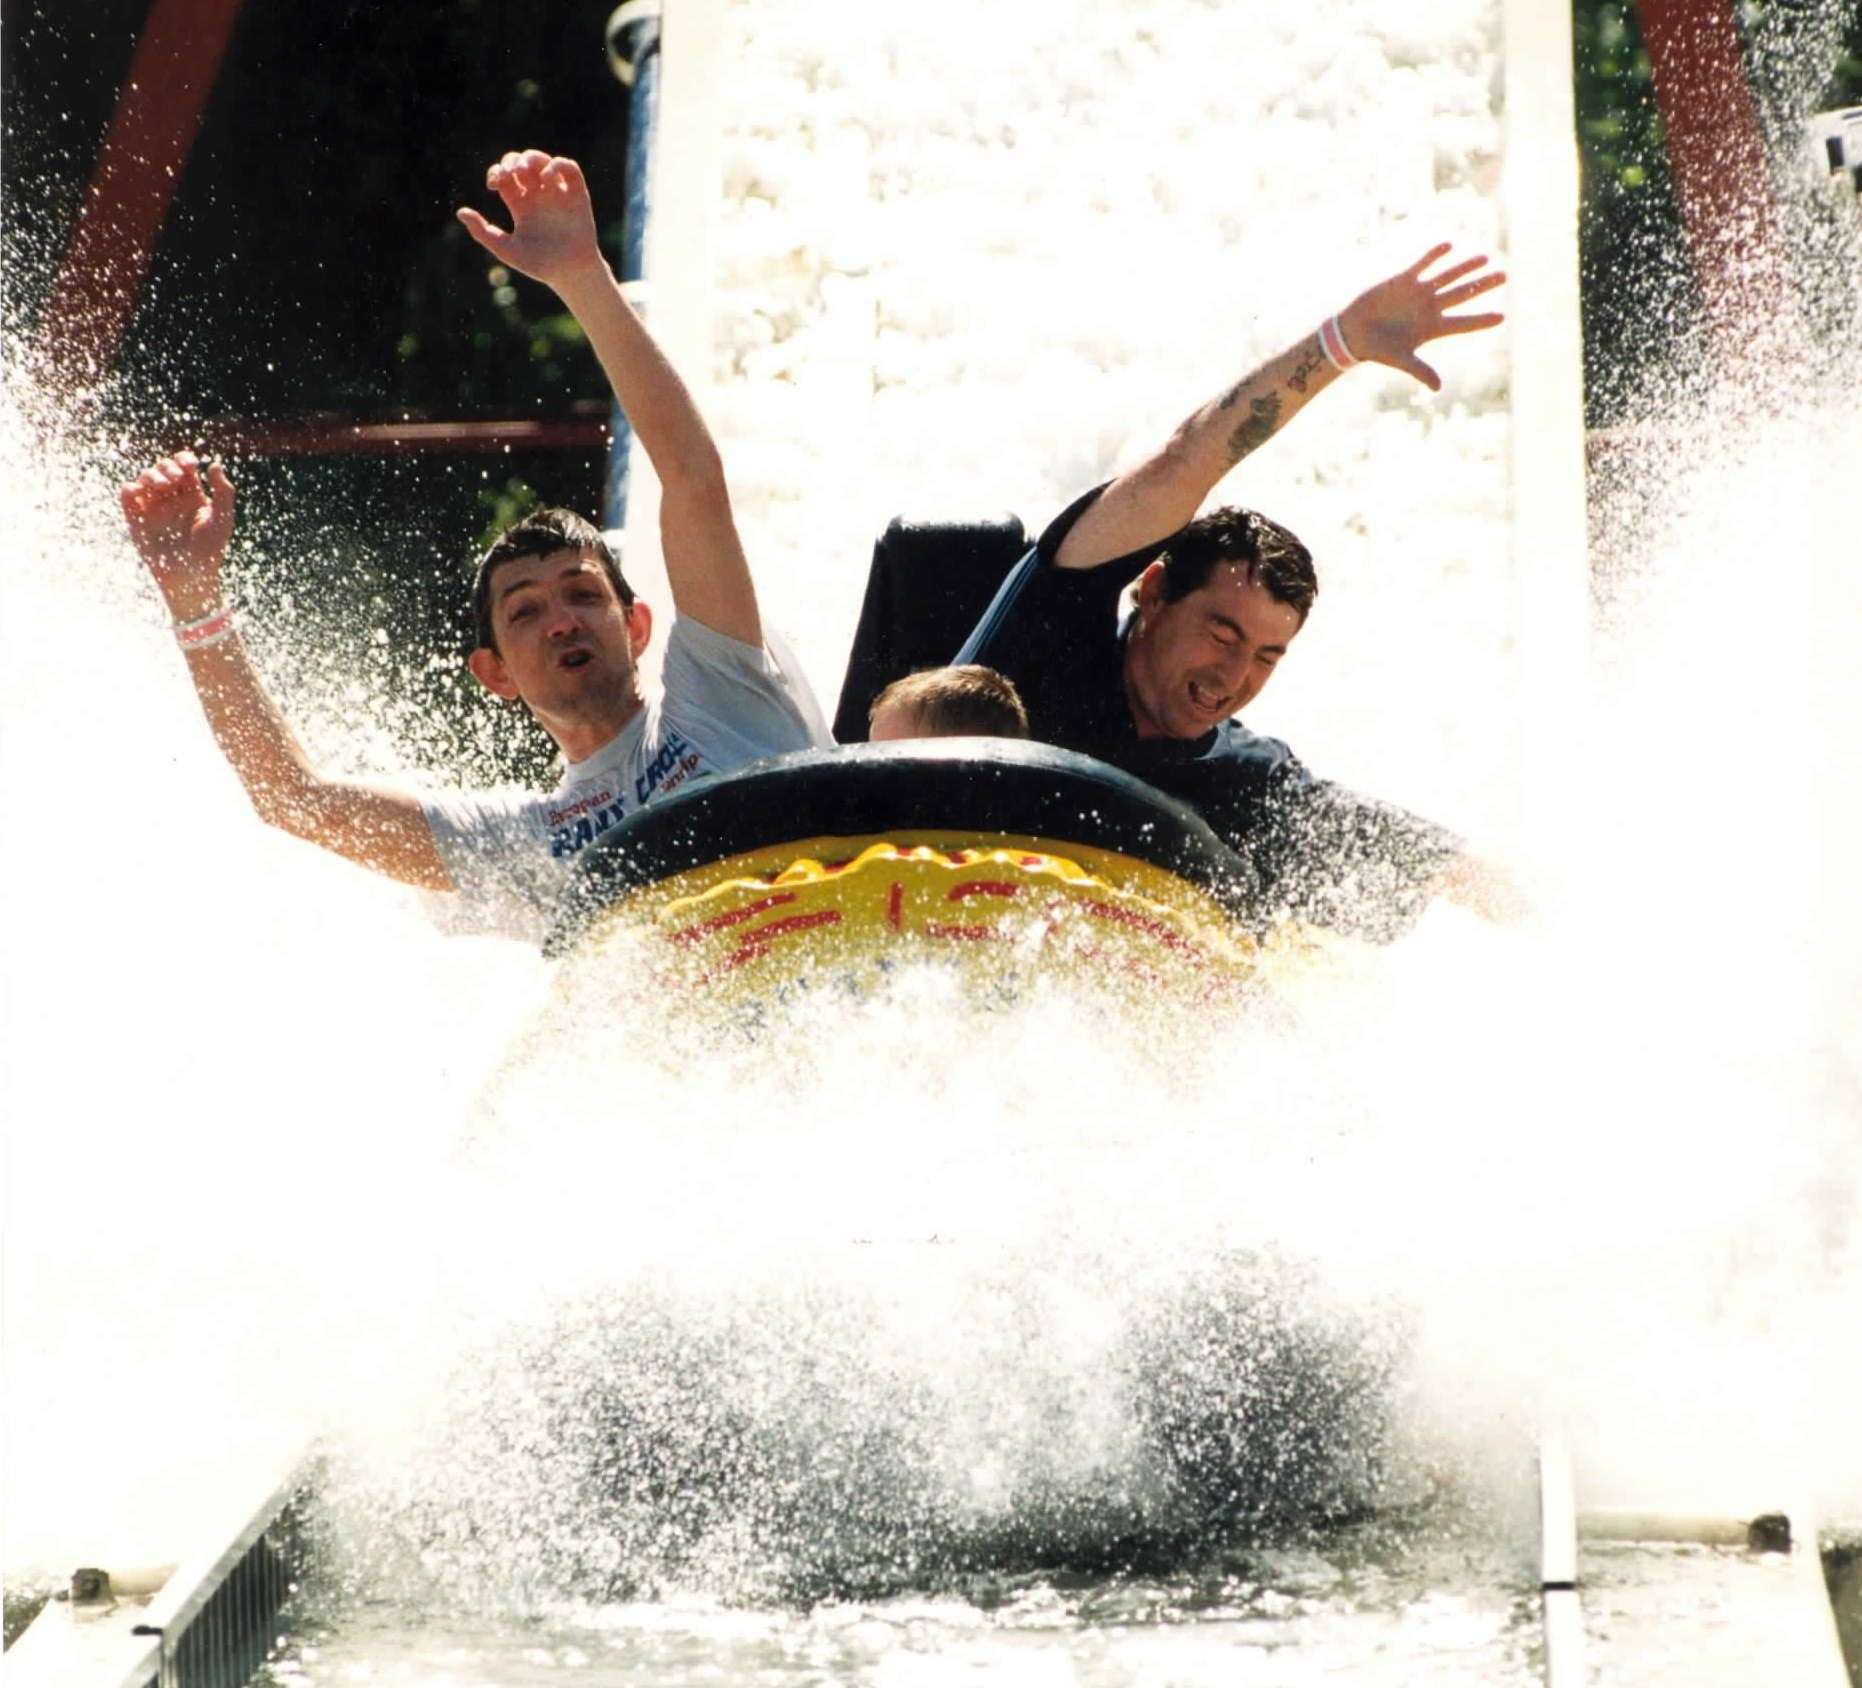 Making a splash on The Log Run at Dreamland in Margate in 1997